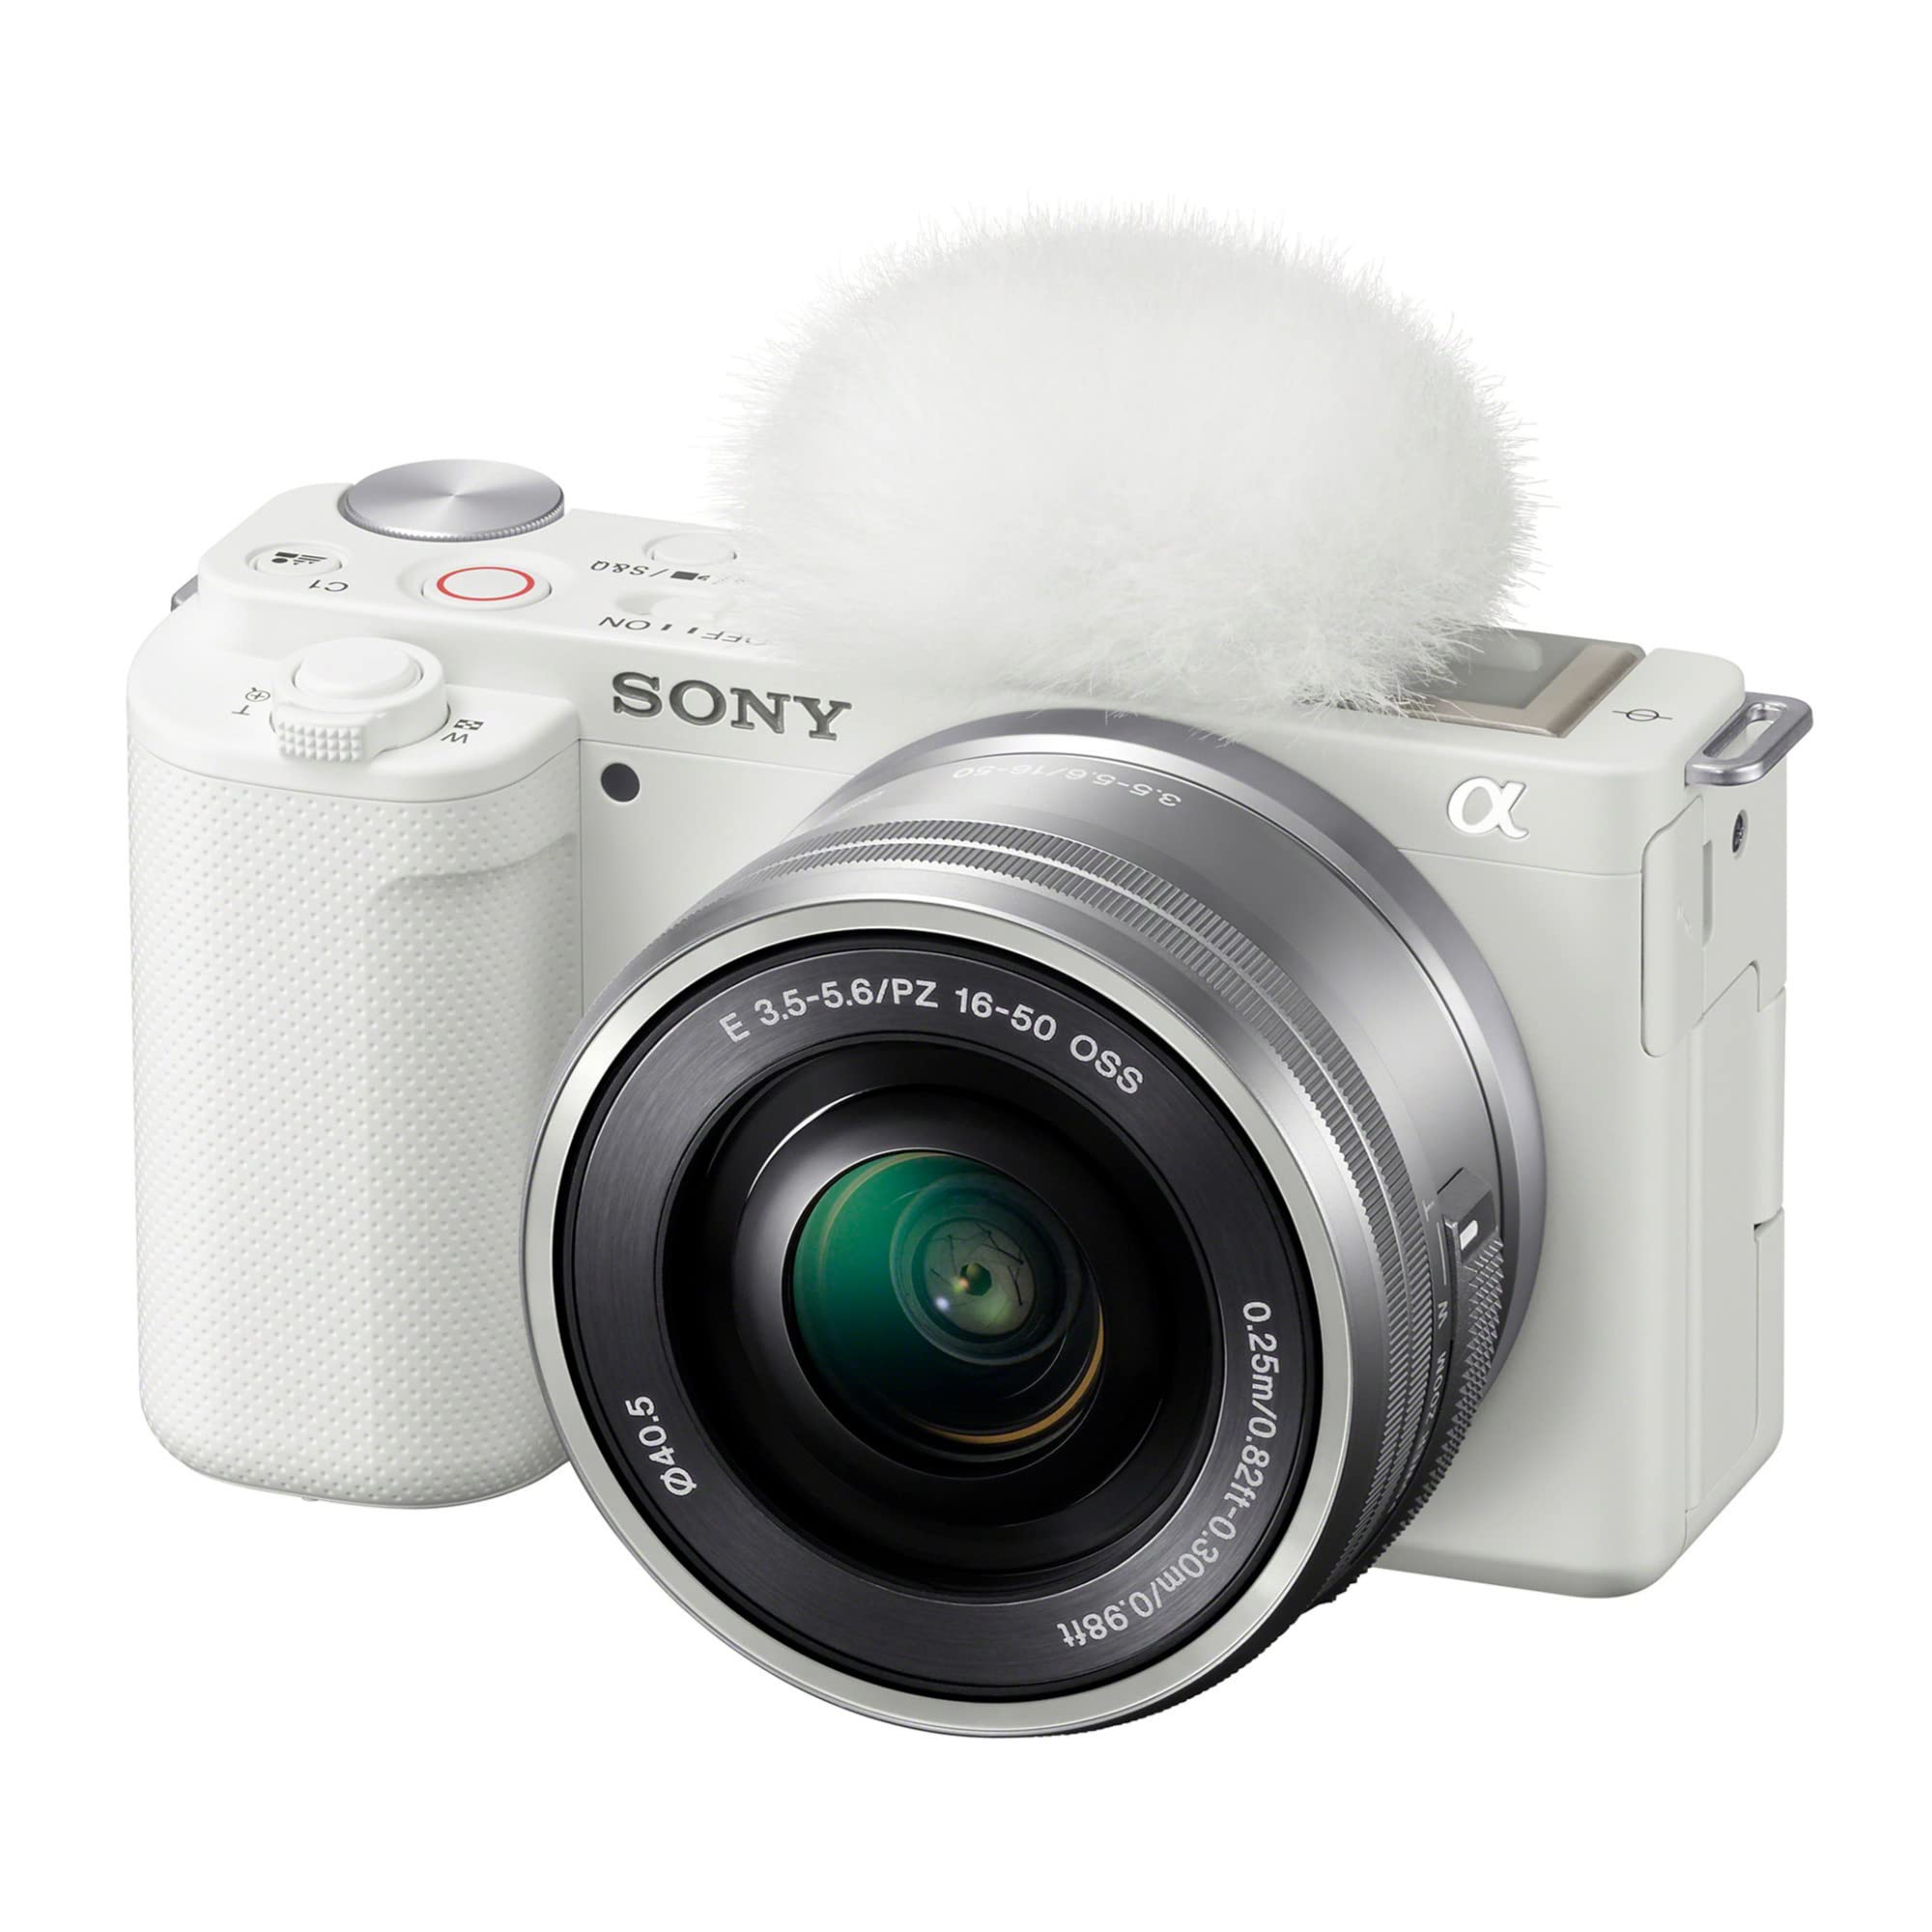 Sony Alpha ZV-E10 APS-C Mirrorless Vlog Camera (White) with 16-50mm Lens Bundle with Content Creator Kit (4 Items)